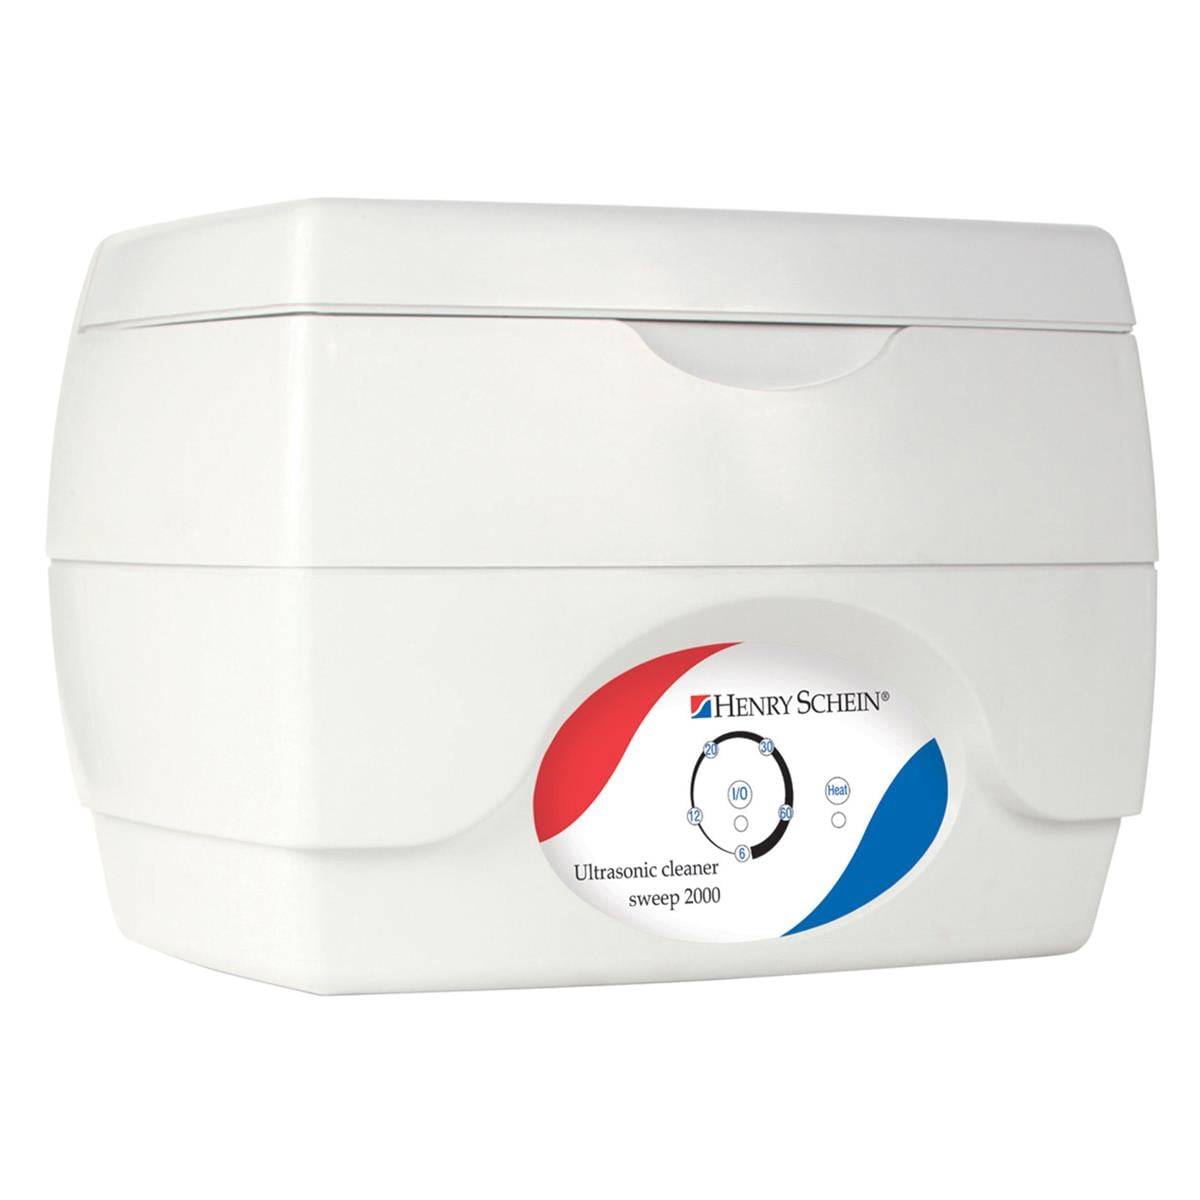 HS Ultrasonic Bath Sweep 2000 with Locking Lid without basket